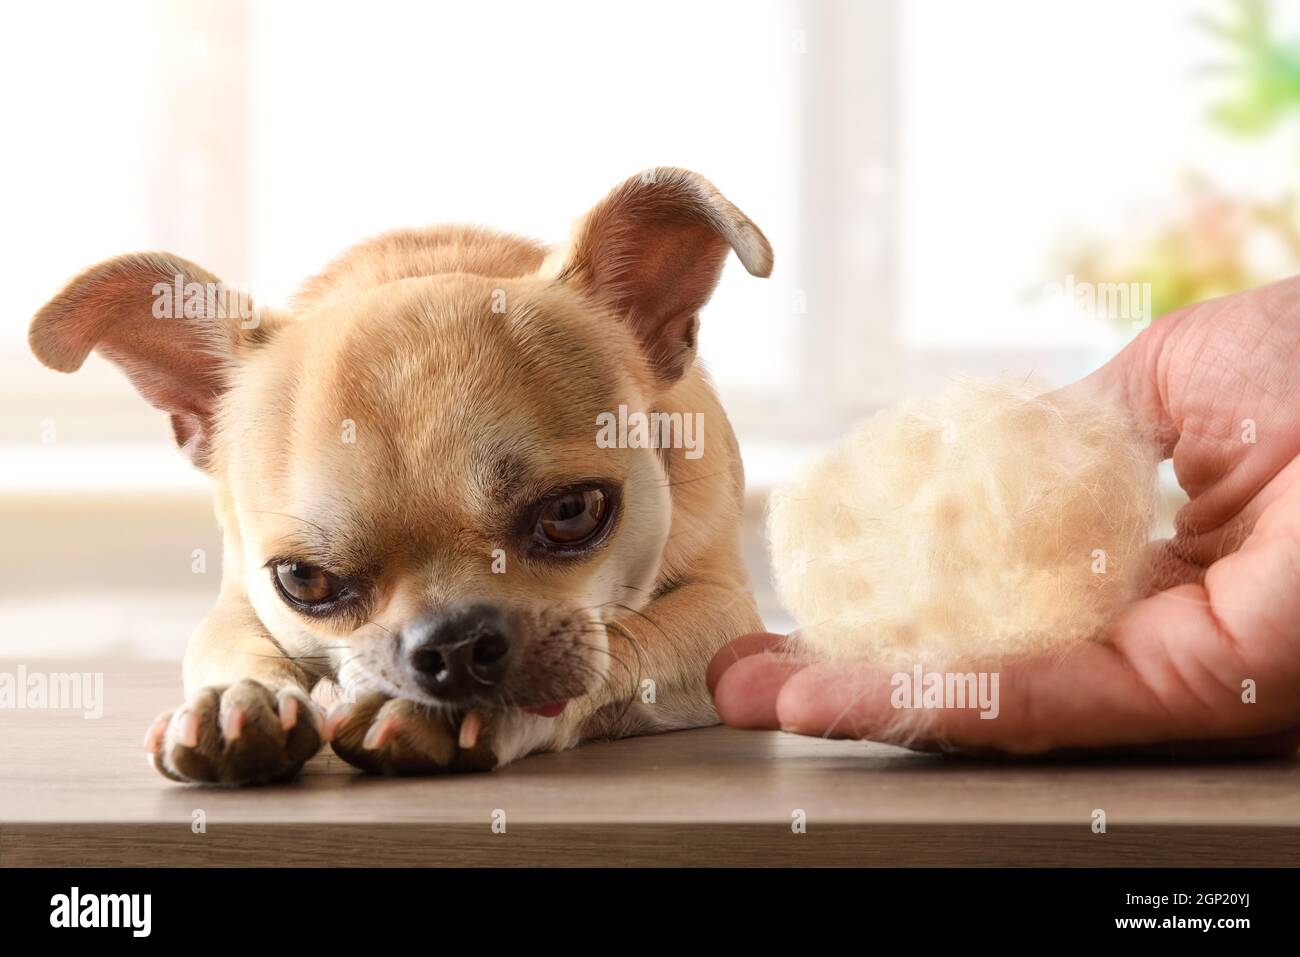 Hand showing animal hair shed due to seasonal hair shedding or health problems. Front view. Horizontal view. Stock Photo